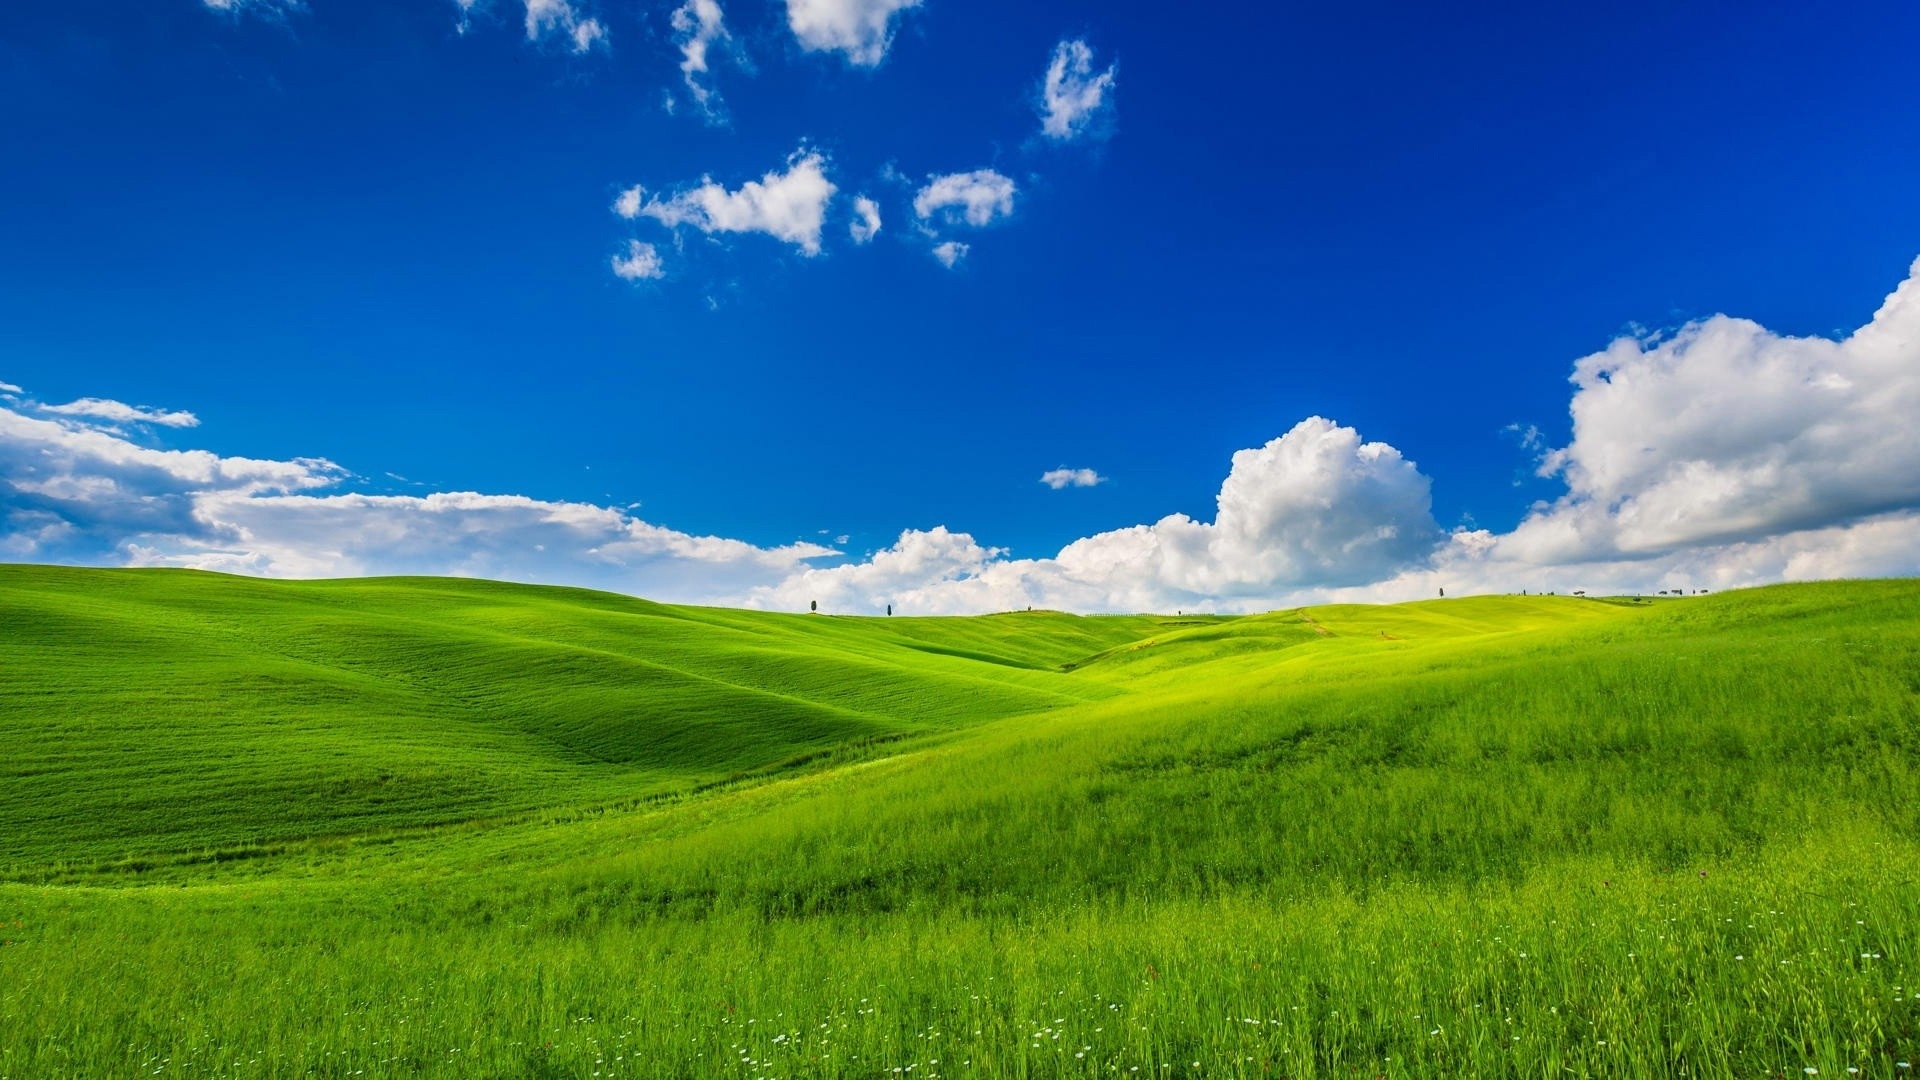 Sky And Grass wallpaper for pc